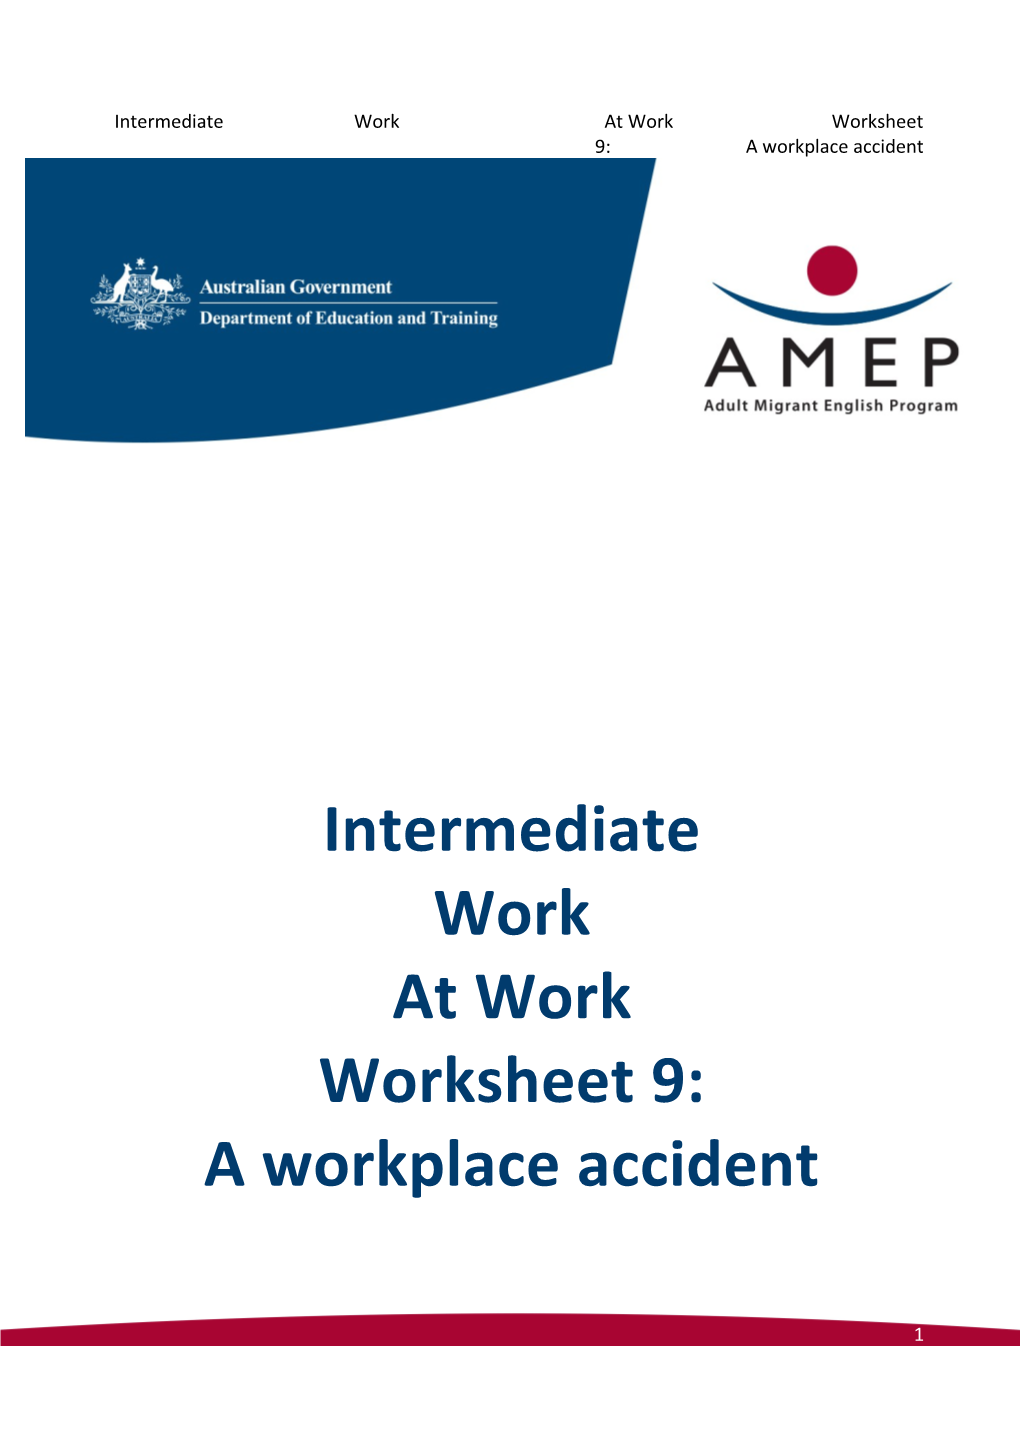 Intermediate Work at Work Worksheet 9: a Workplace Accident